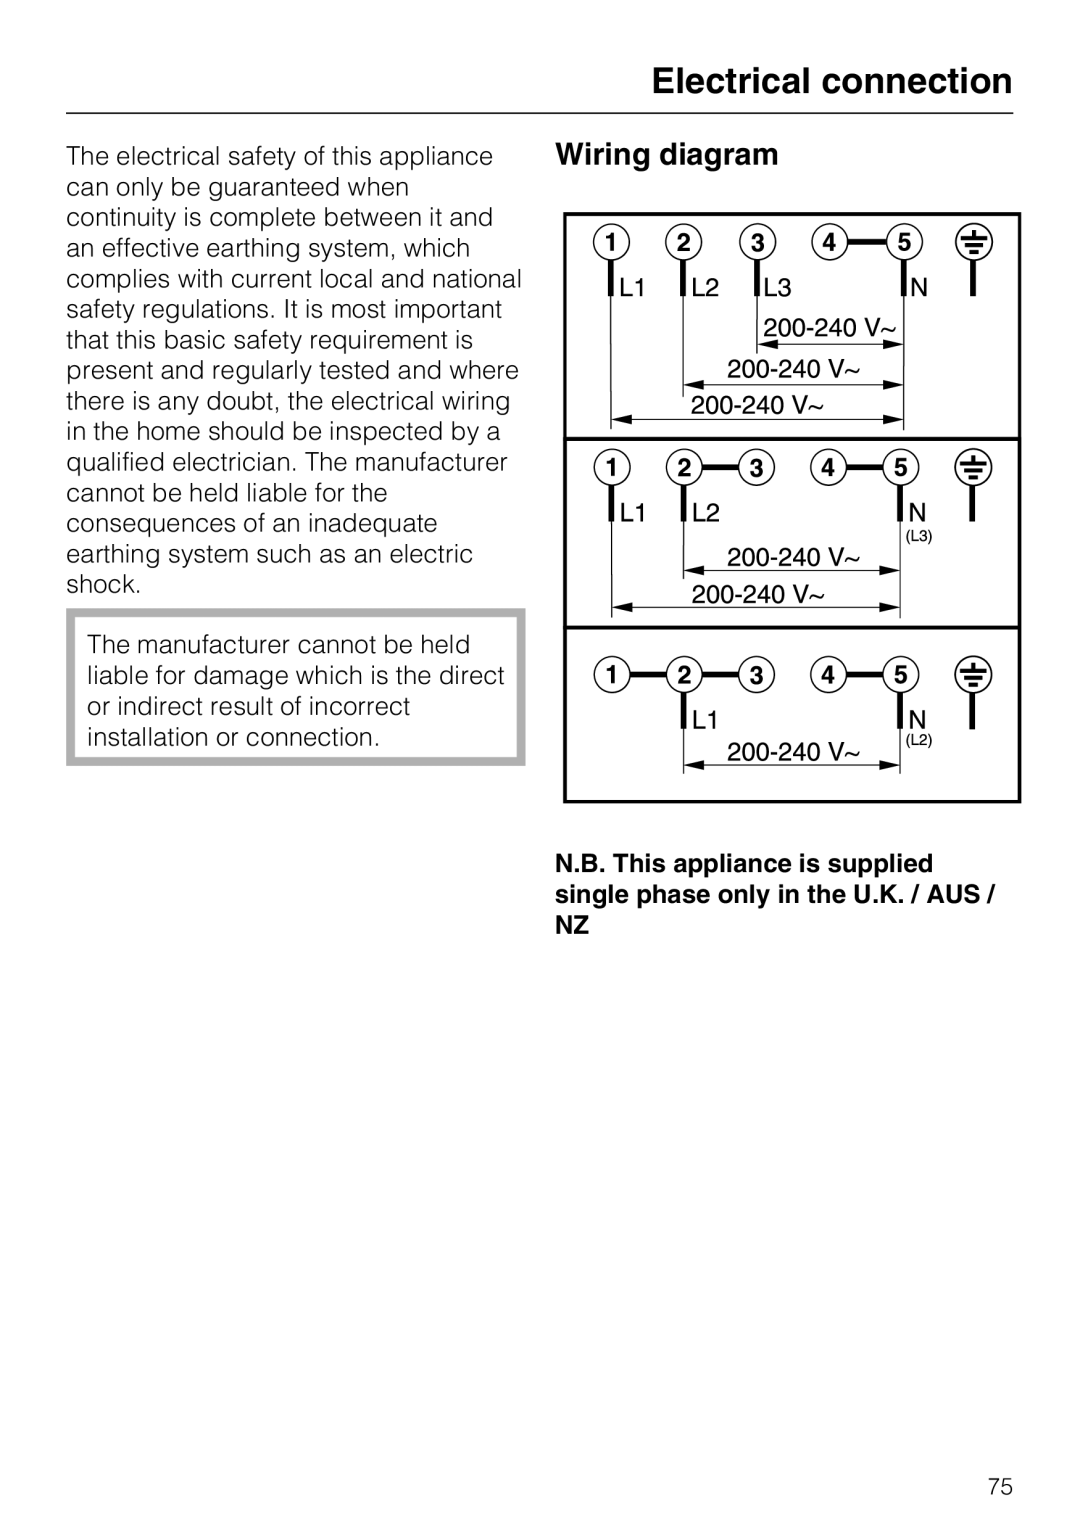 Miele KM6322 Wiring diagram, Electrical connection, N.B. This appliance is supplied single phase only in the U.K. / AUS 